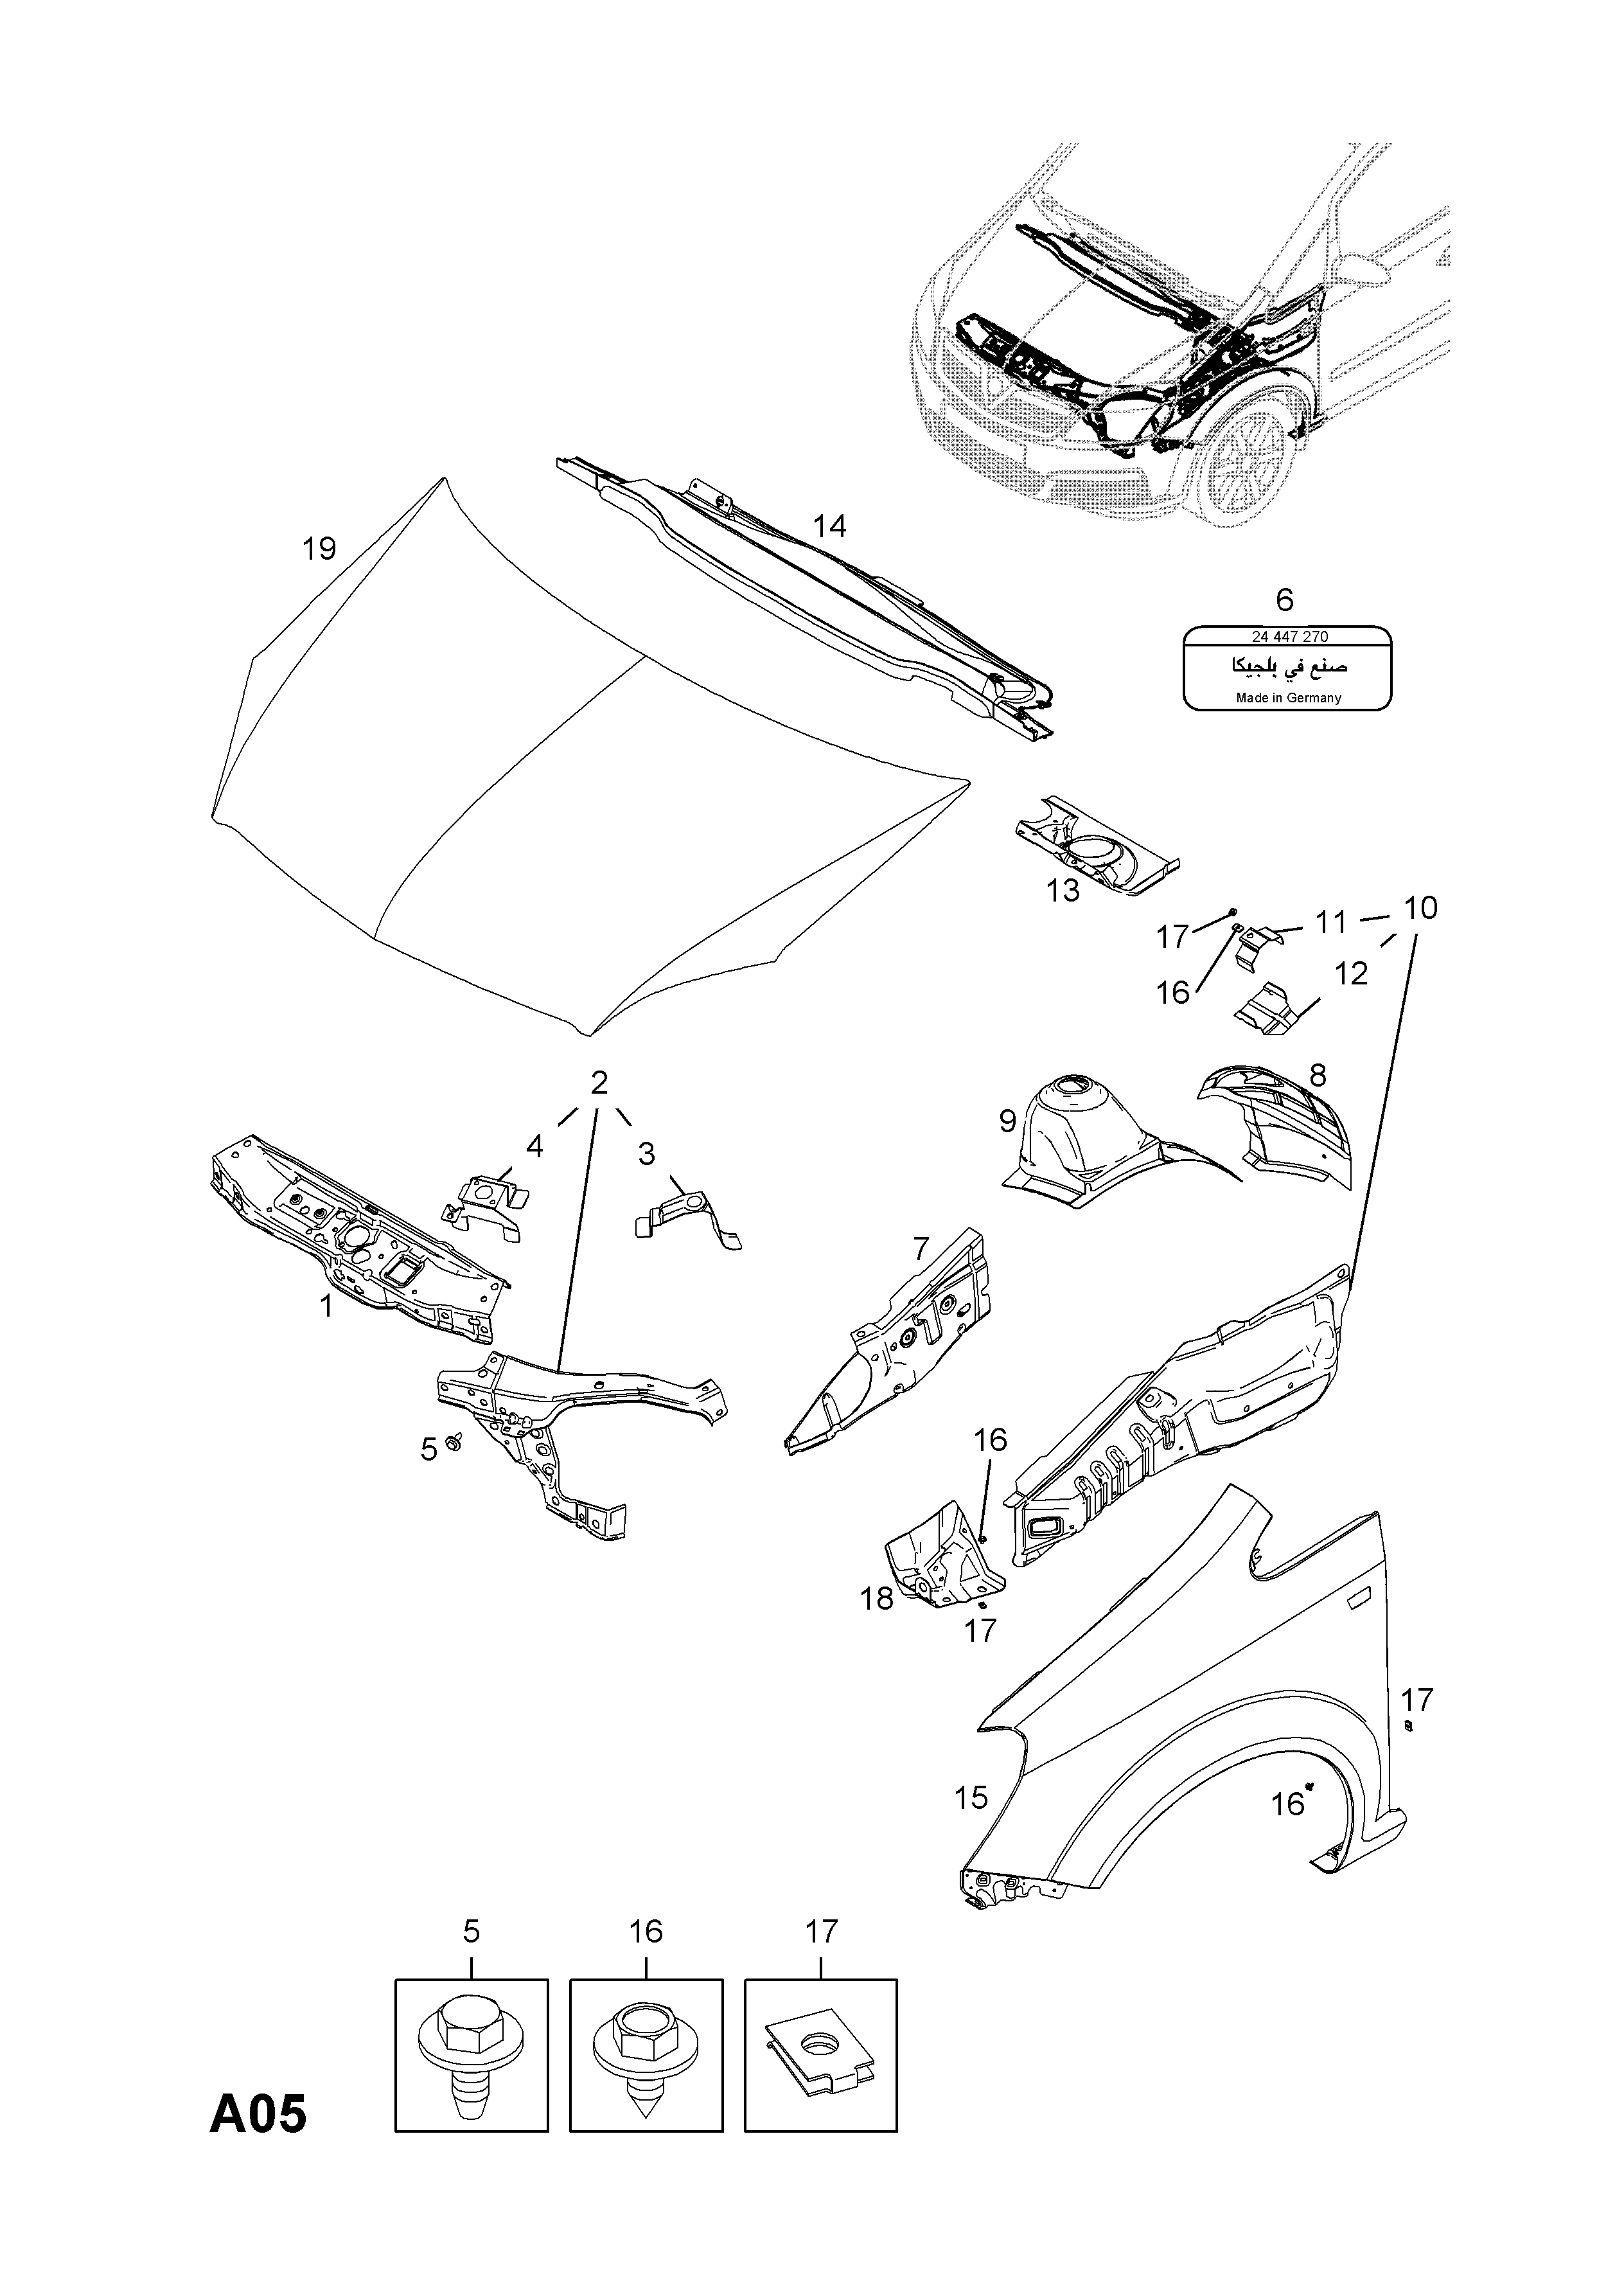 BONNET LOCK <small><i>[PLEASE REFER TO GROUP C (BONNET FITTINGS) (SHORTCUT: A05.C12)]</i></small>